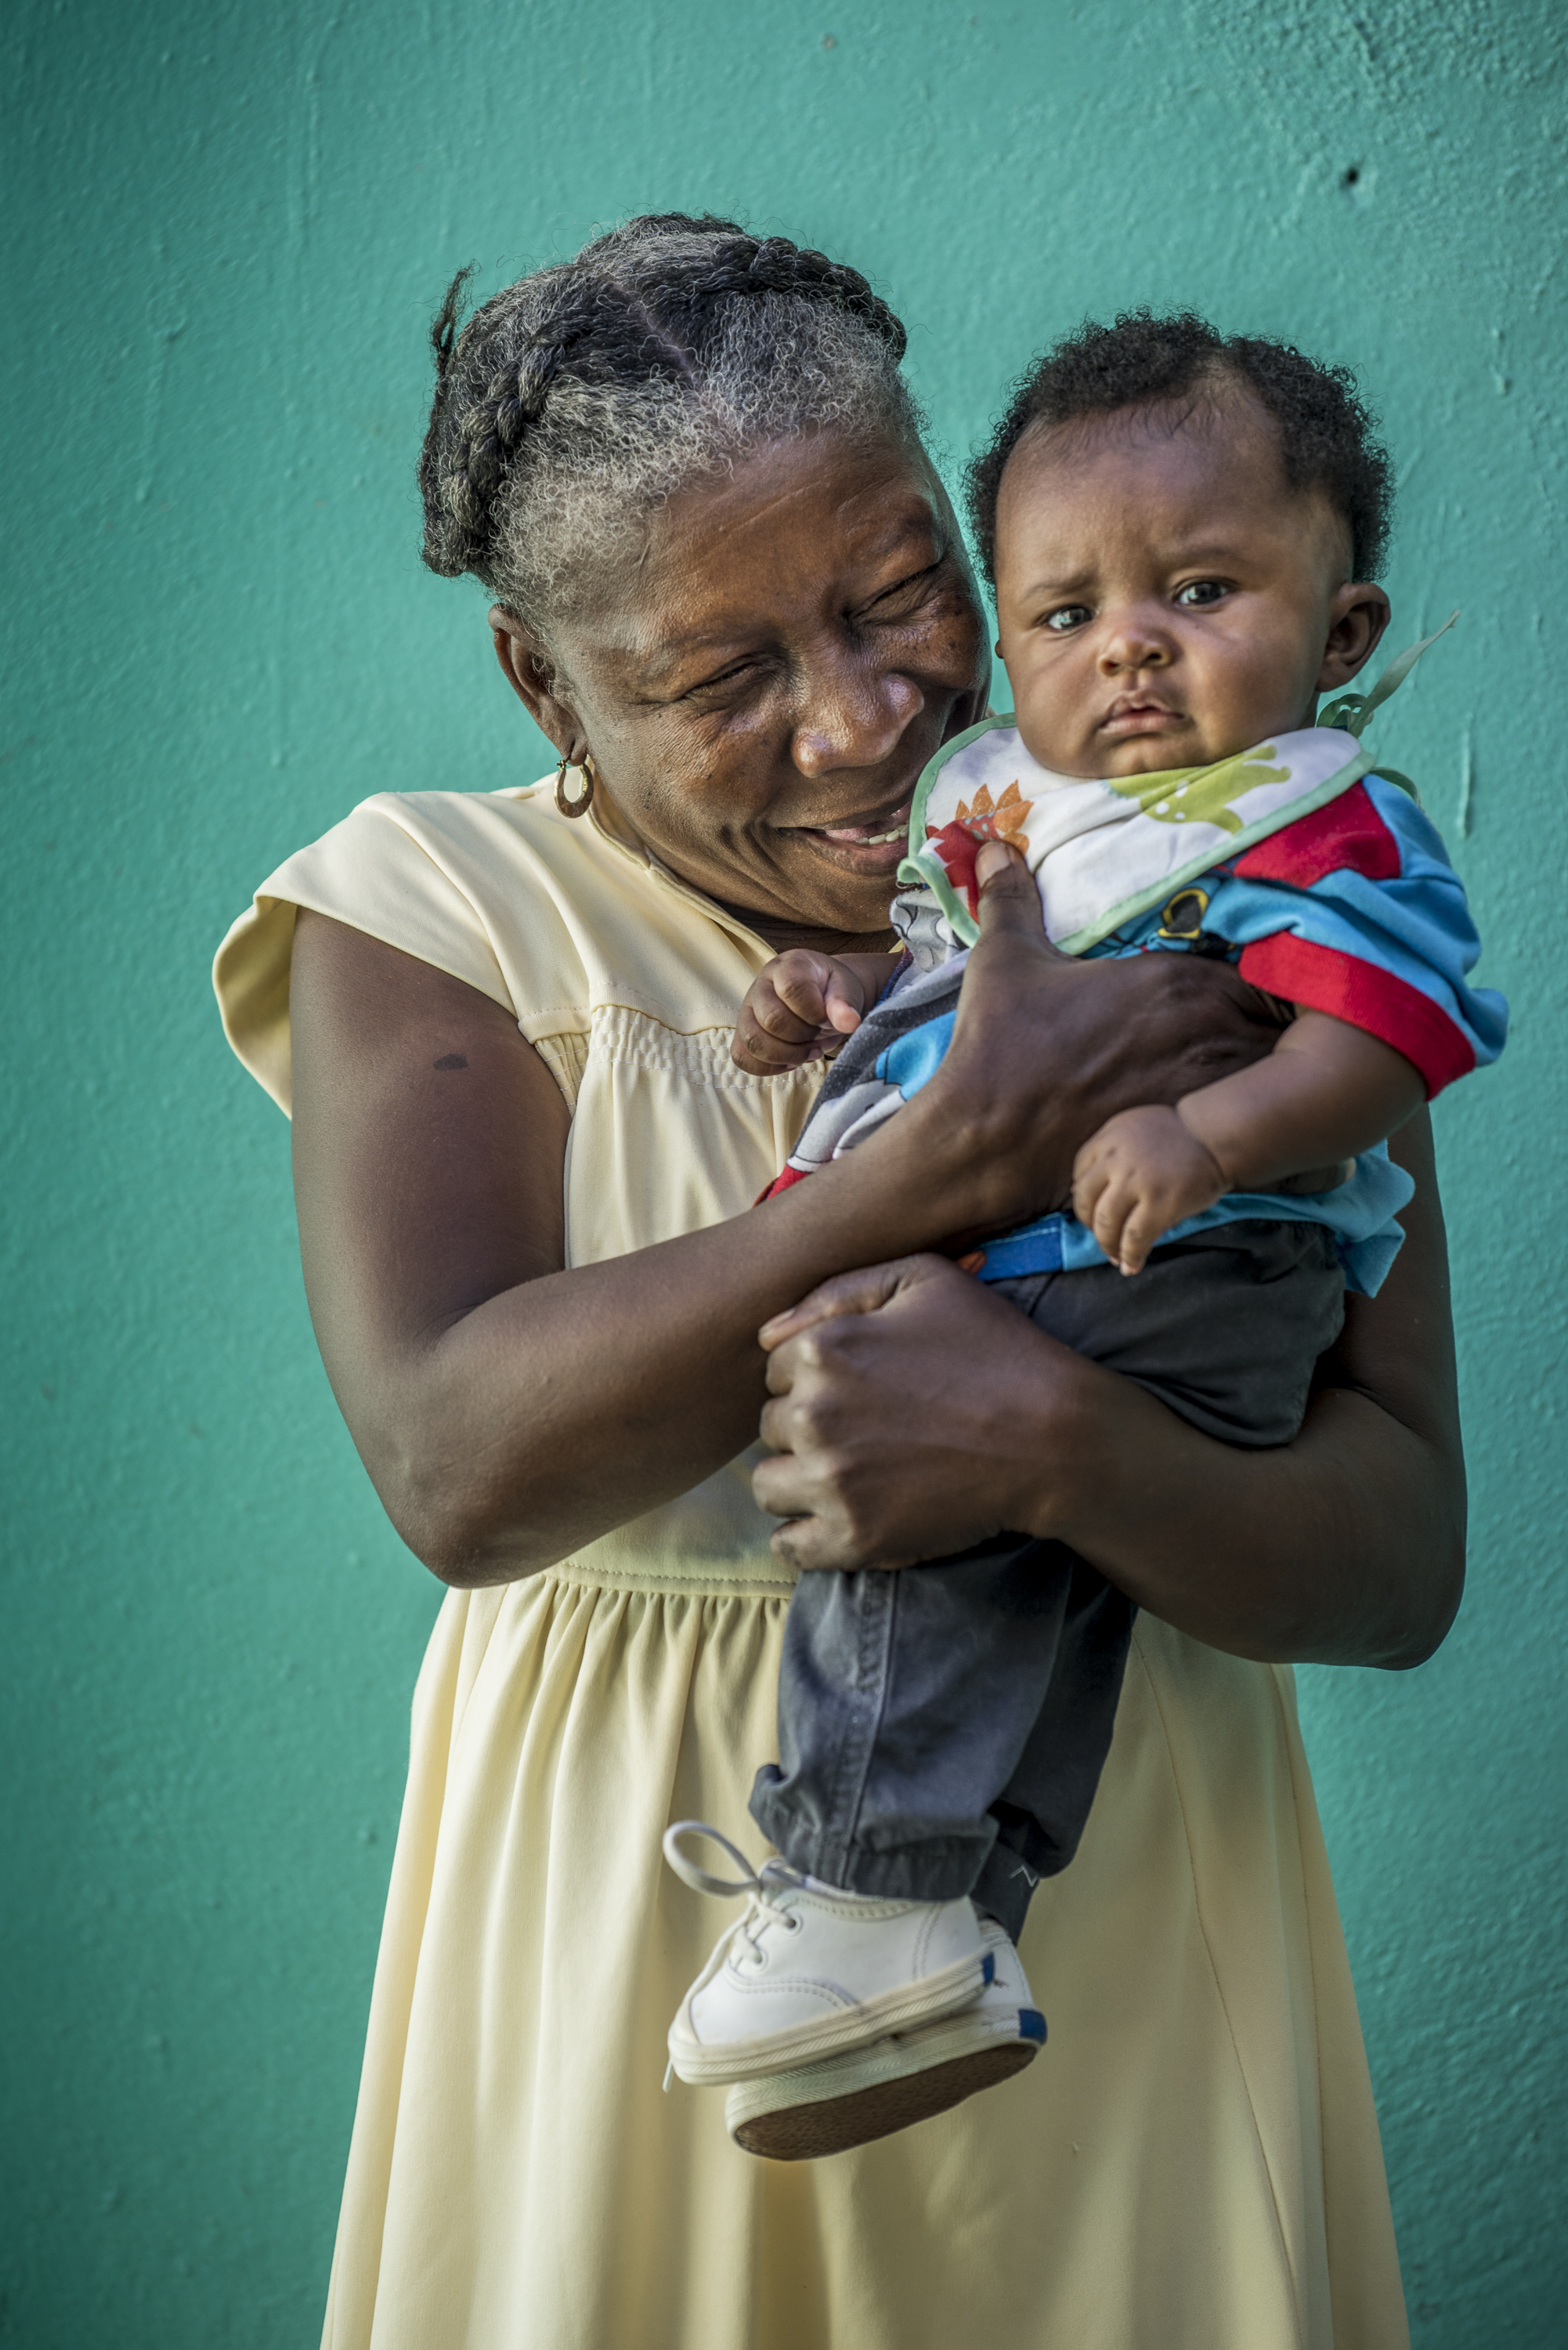 Haitian woman holding toddler in front of green backdrop.